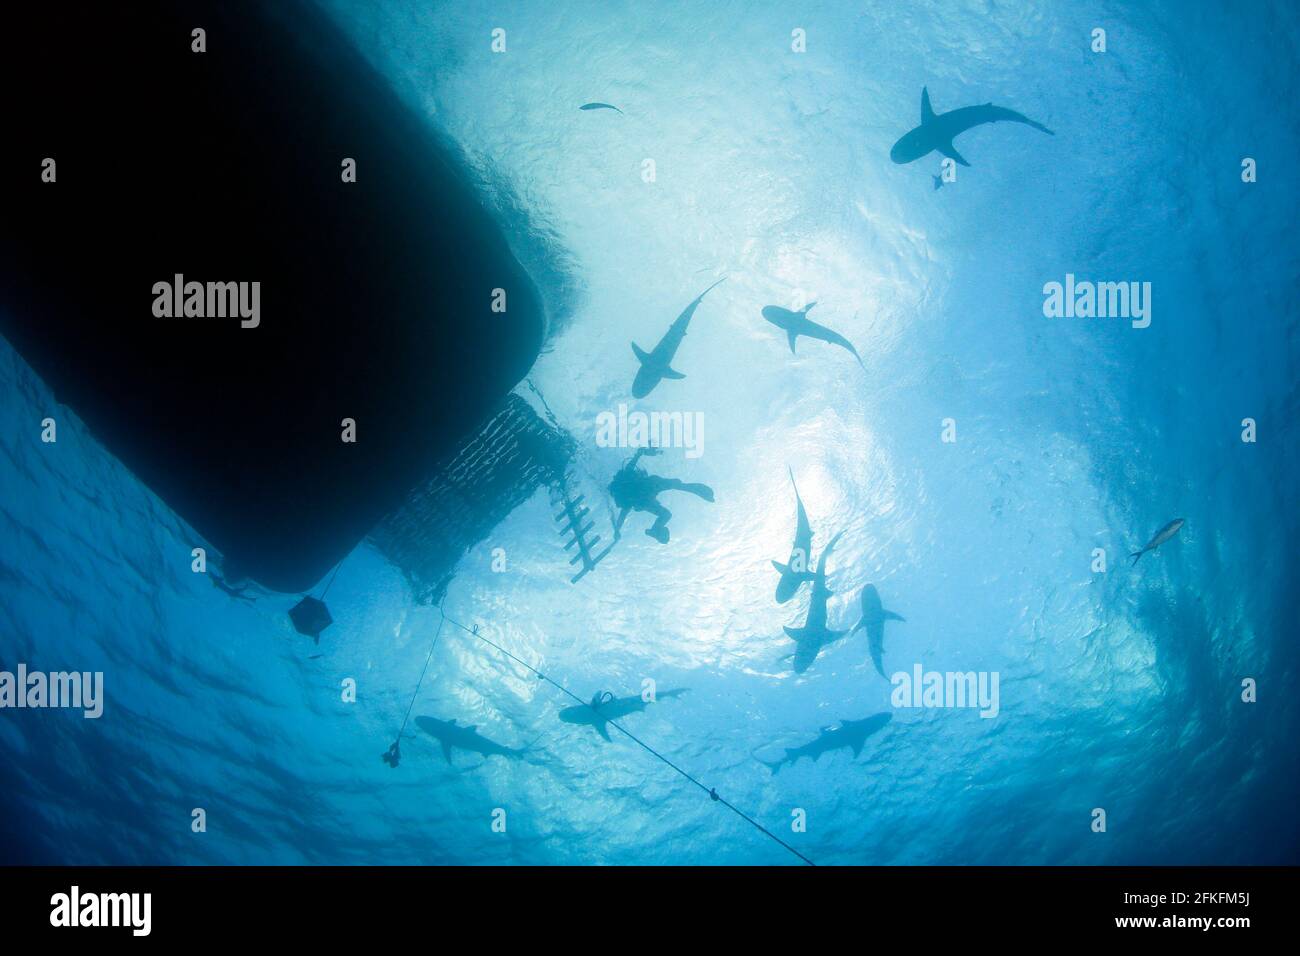 Plenty of Sharks against the Surface, with Diver in the Middle, viewed from Underneath. Tiger Beach, Bahamas Stock Photo